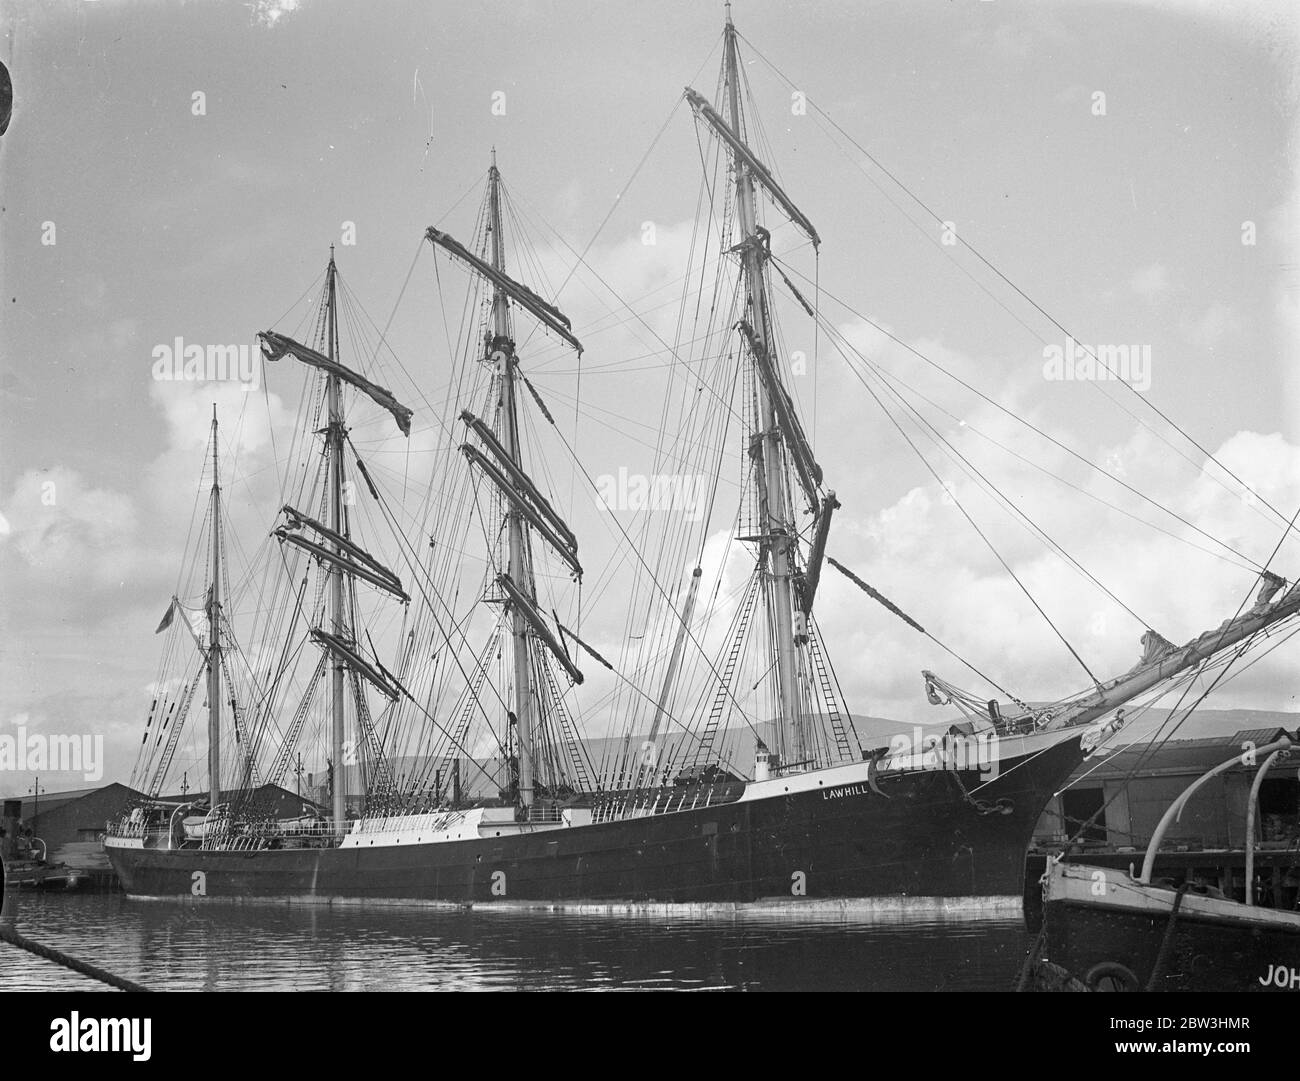 Harbour jubilee Black and White Stock Photos & Images - Alamy